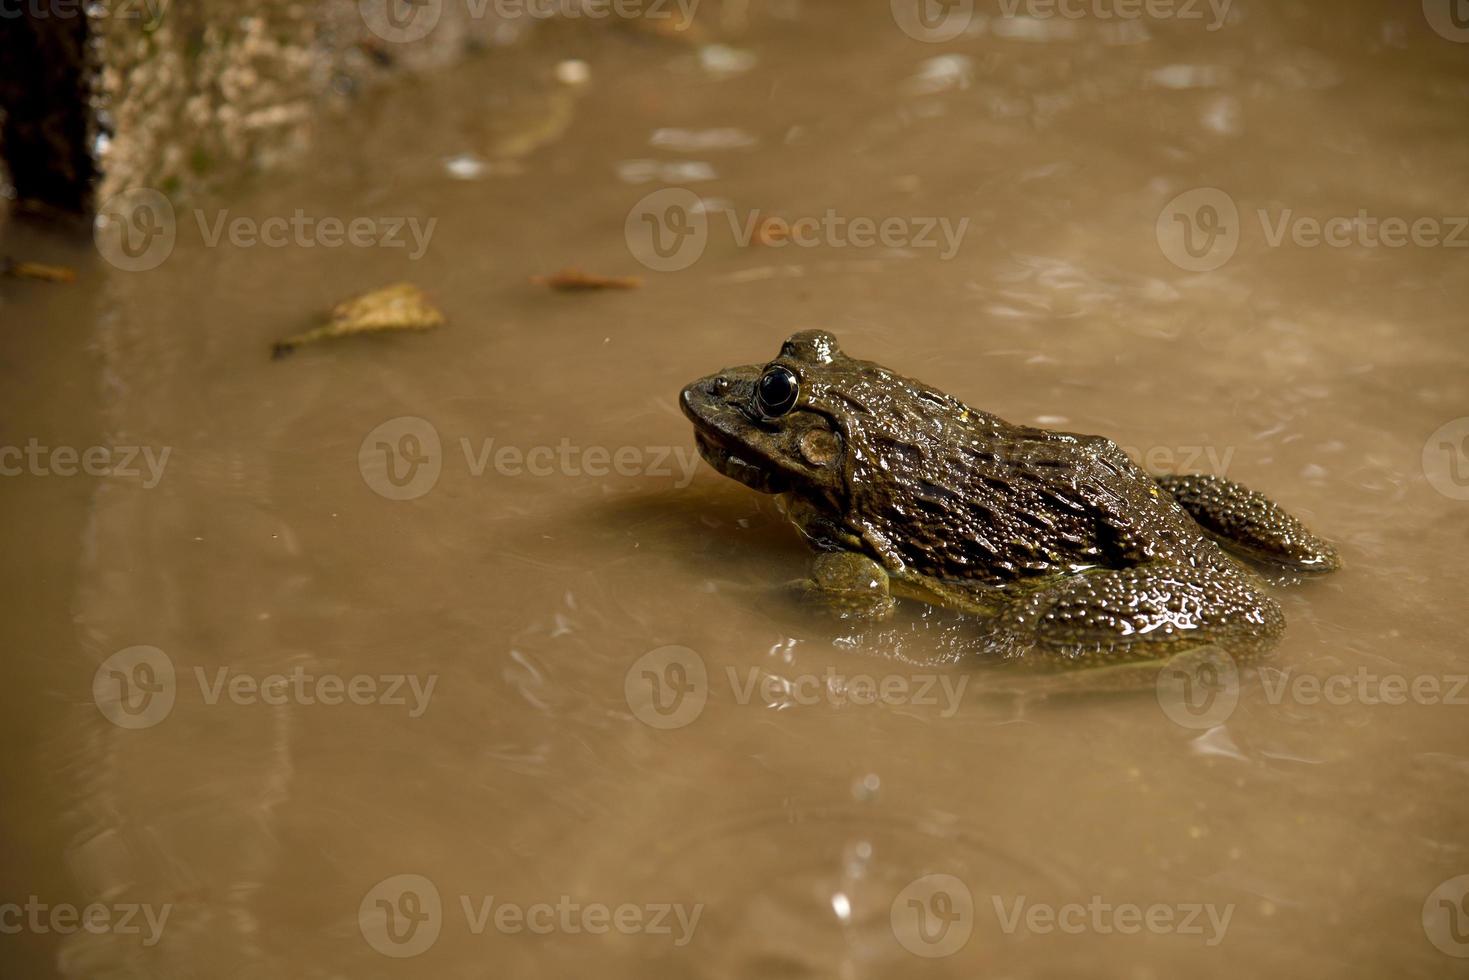 Frog in water or pond, close up photo